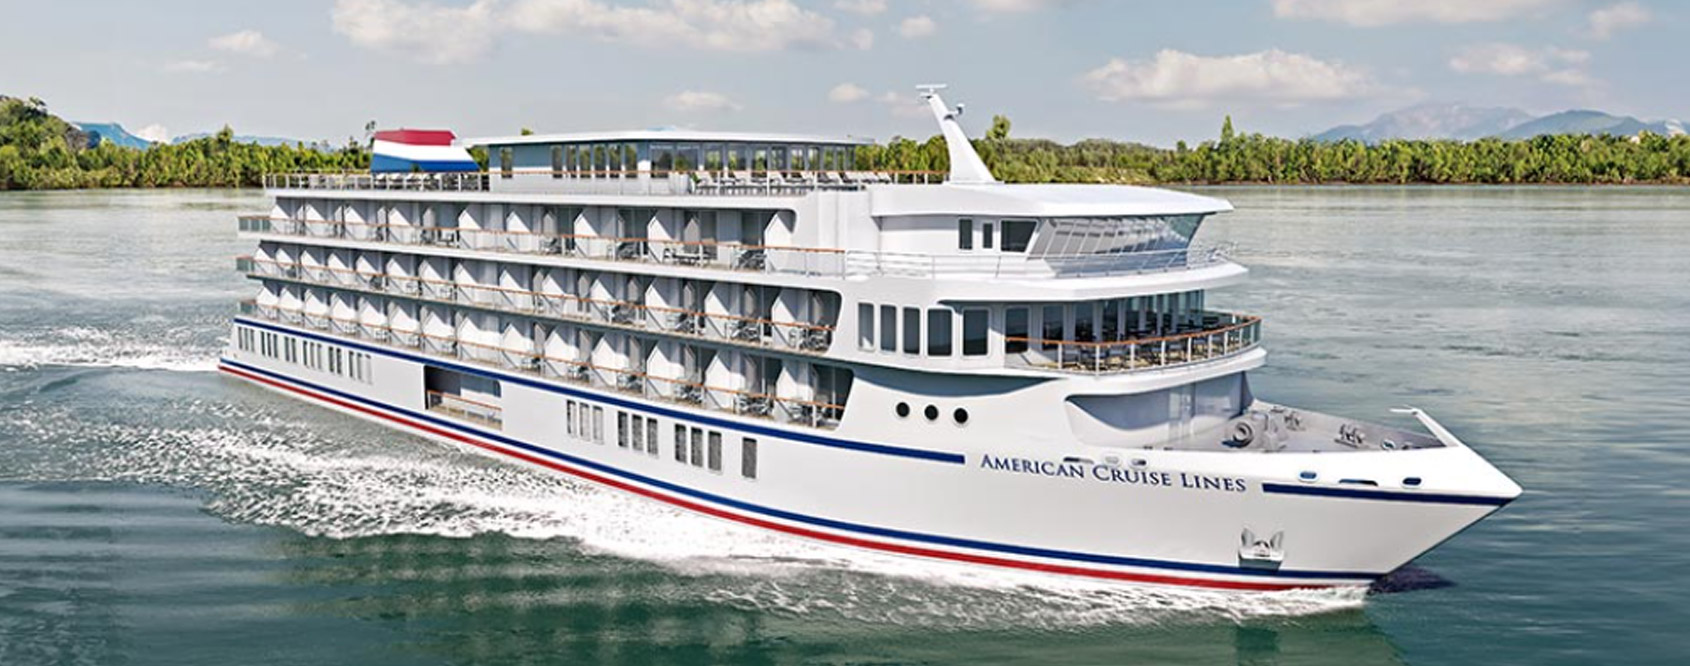 American Cruise Lines Main Image